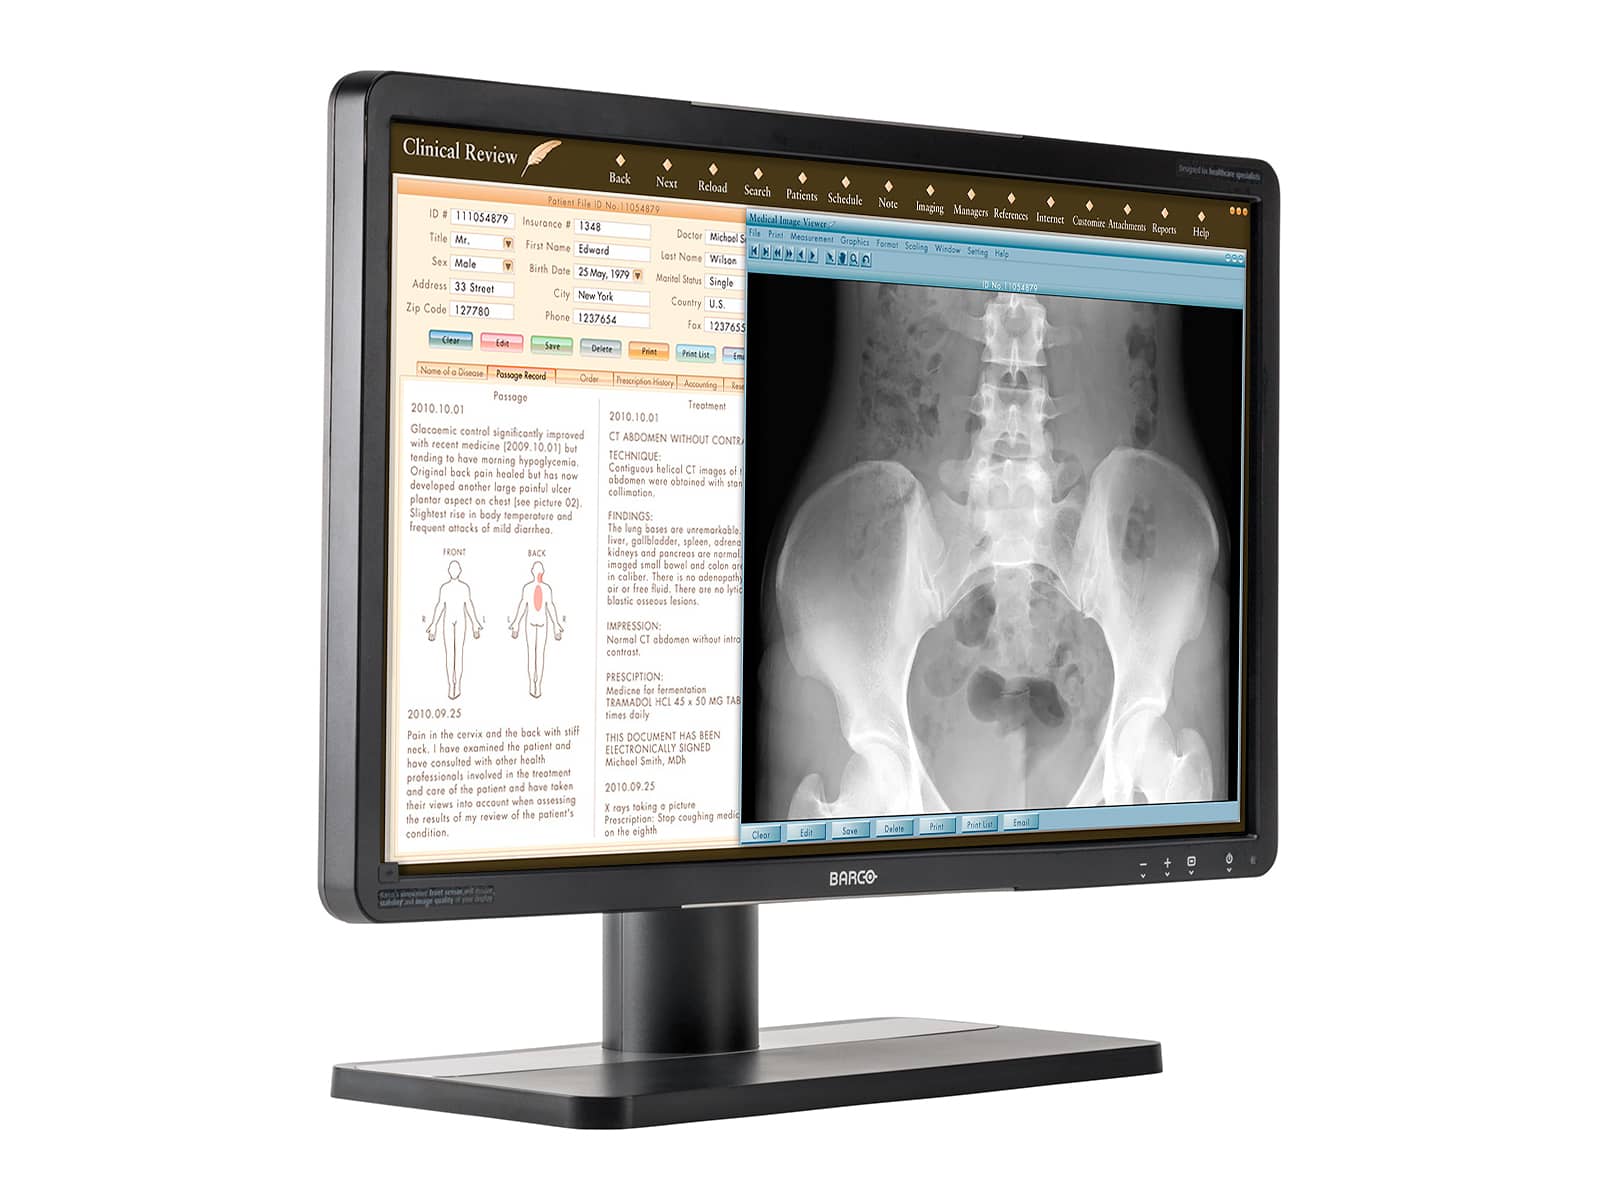 Barco Eonis MDRC-2224 2MP 24" Color LED Clinical Review Display Monitor (K9303005A) Monitors.com 